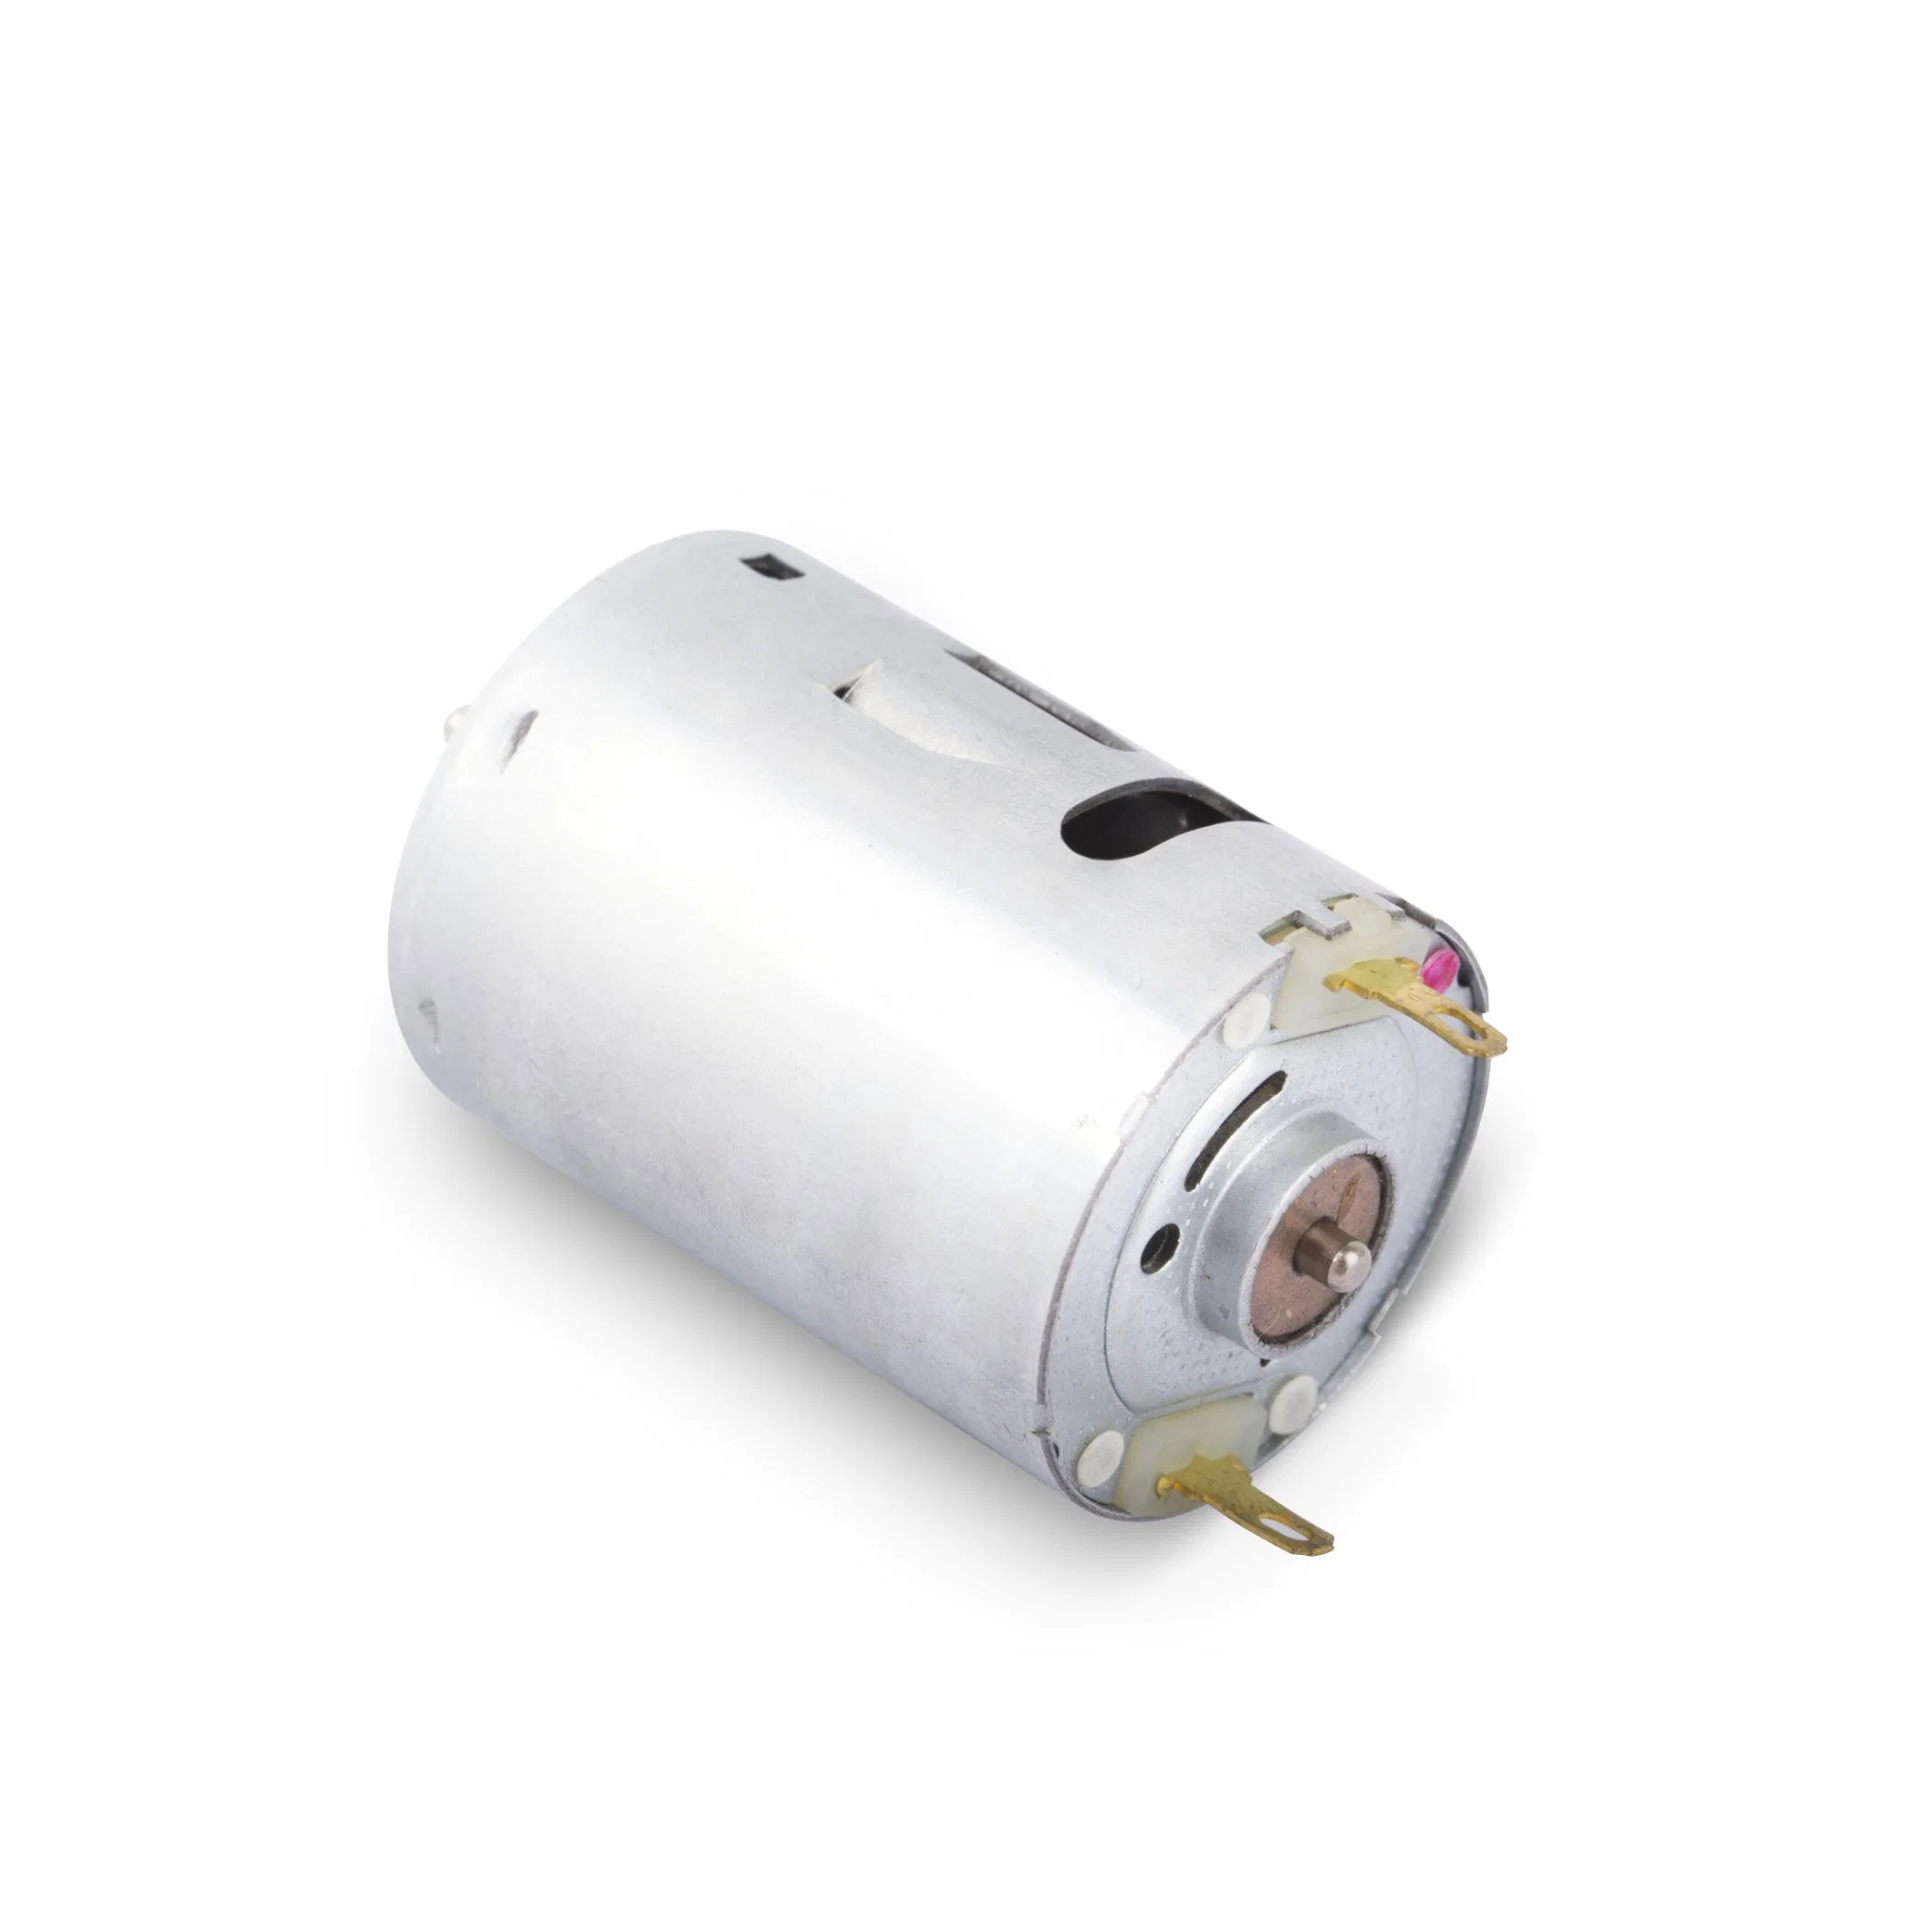 Kinmore 8 Volt DC Motor Vehicle DC Electric Motors DC Electric Motor Stable Performance